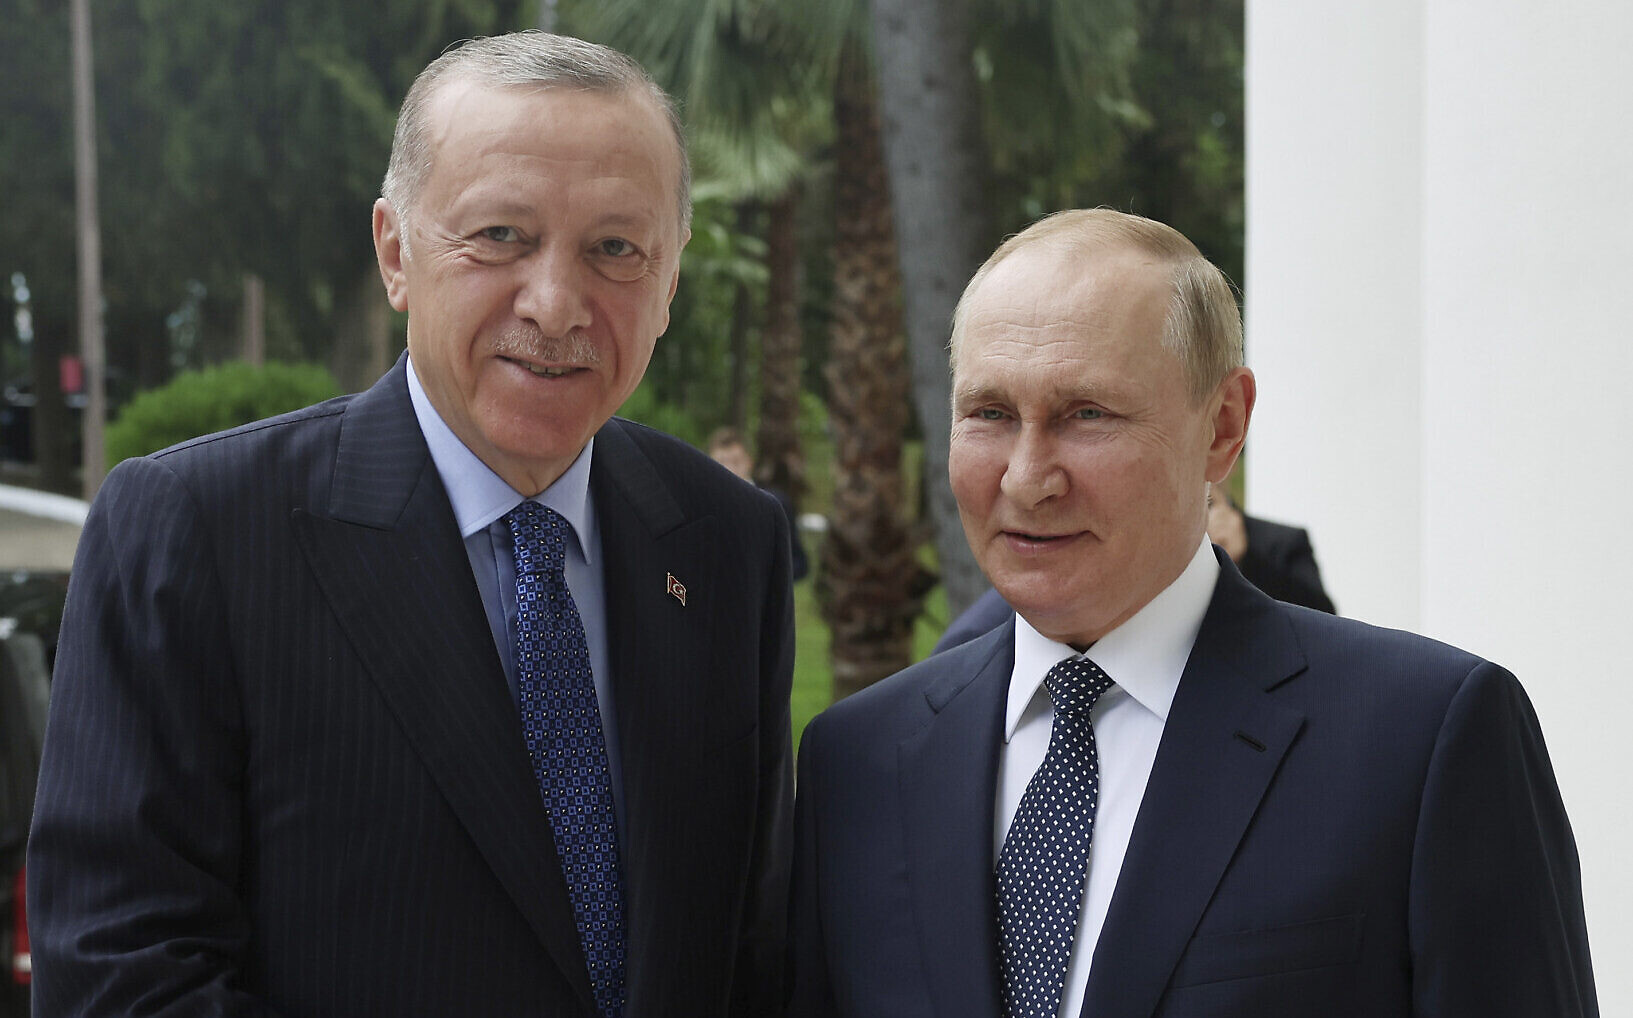 Turkey downplays threat of US sanctions over its Russia ties | The Times of Israel